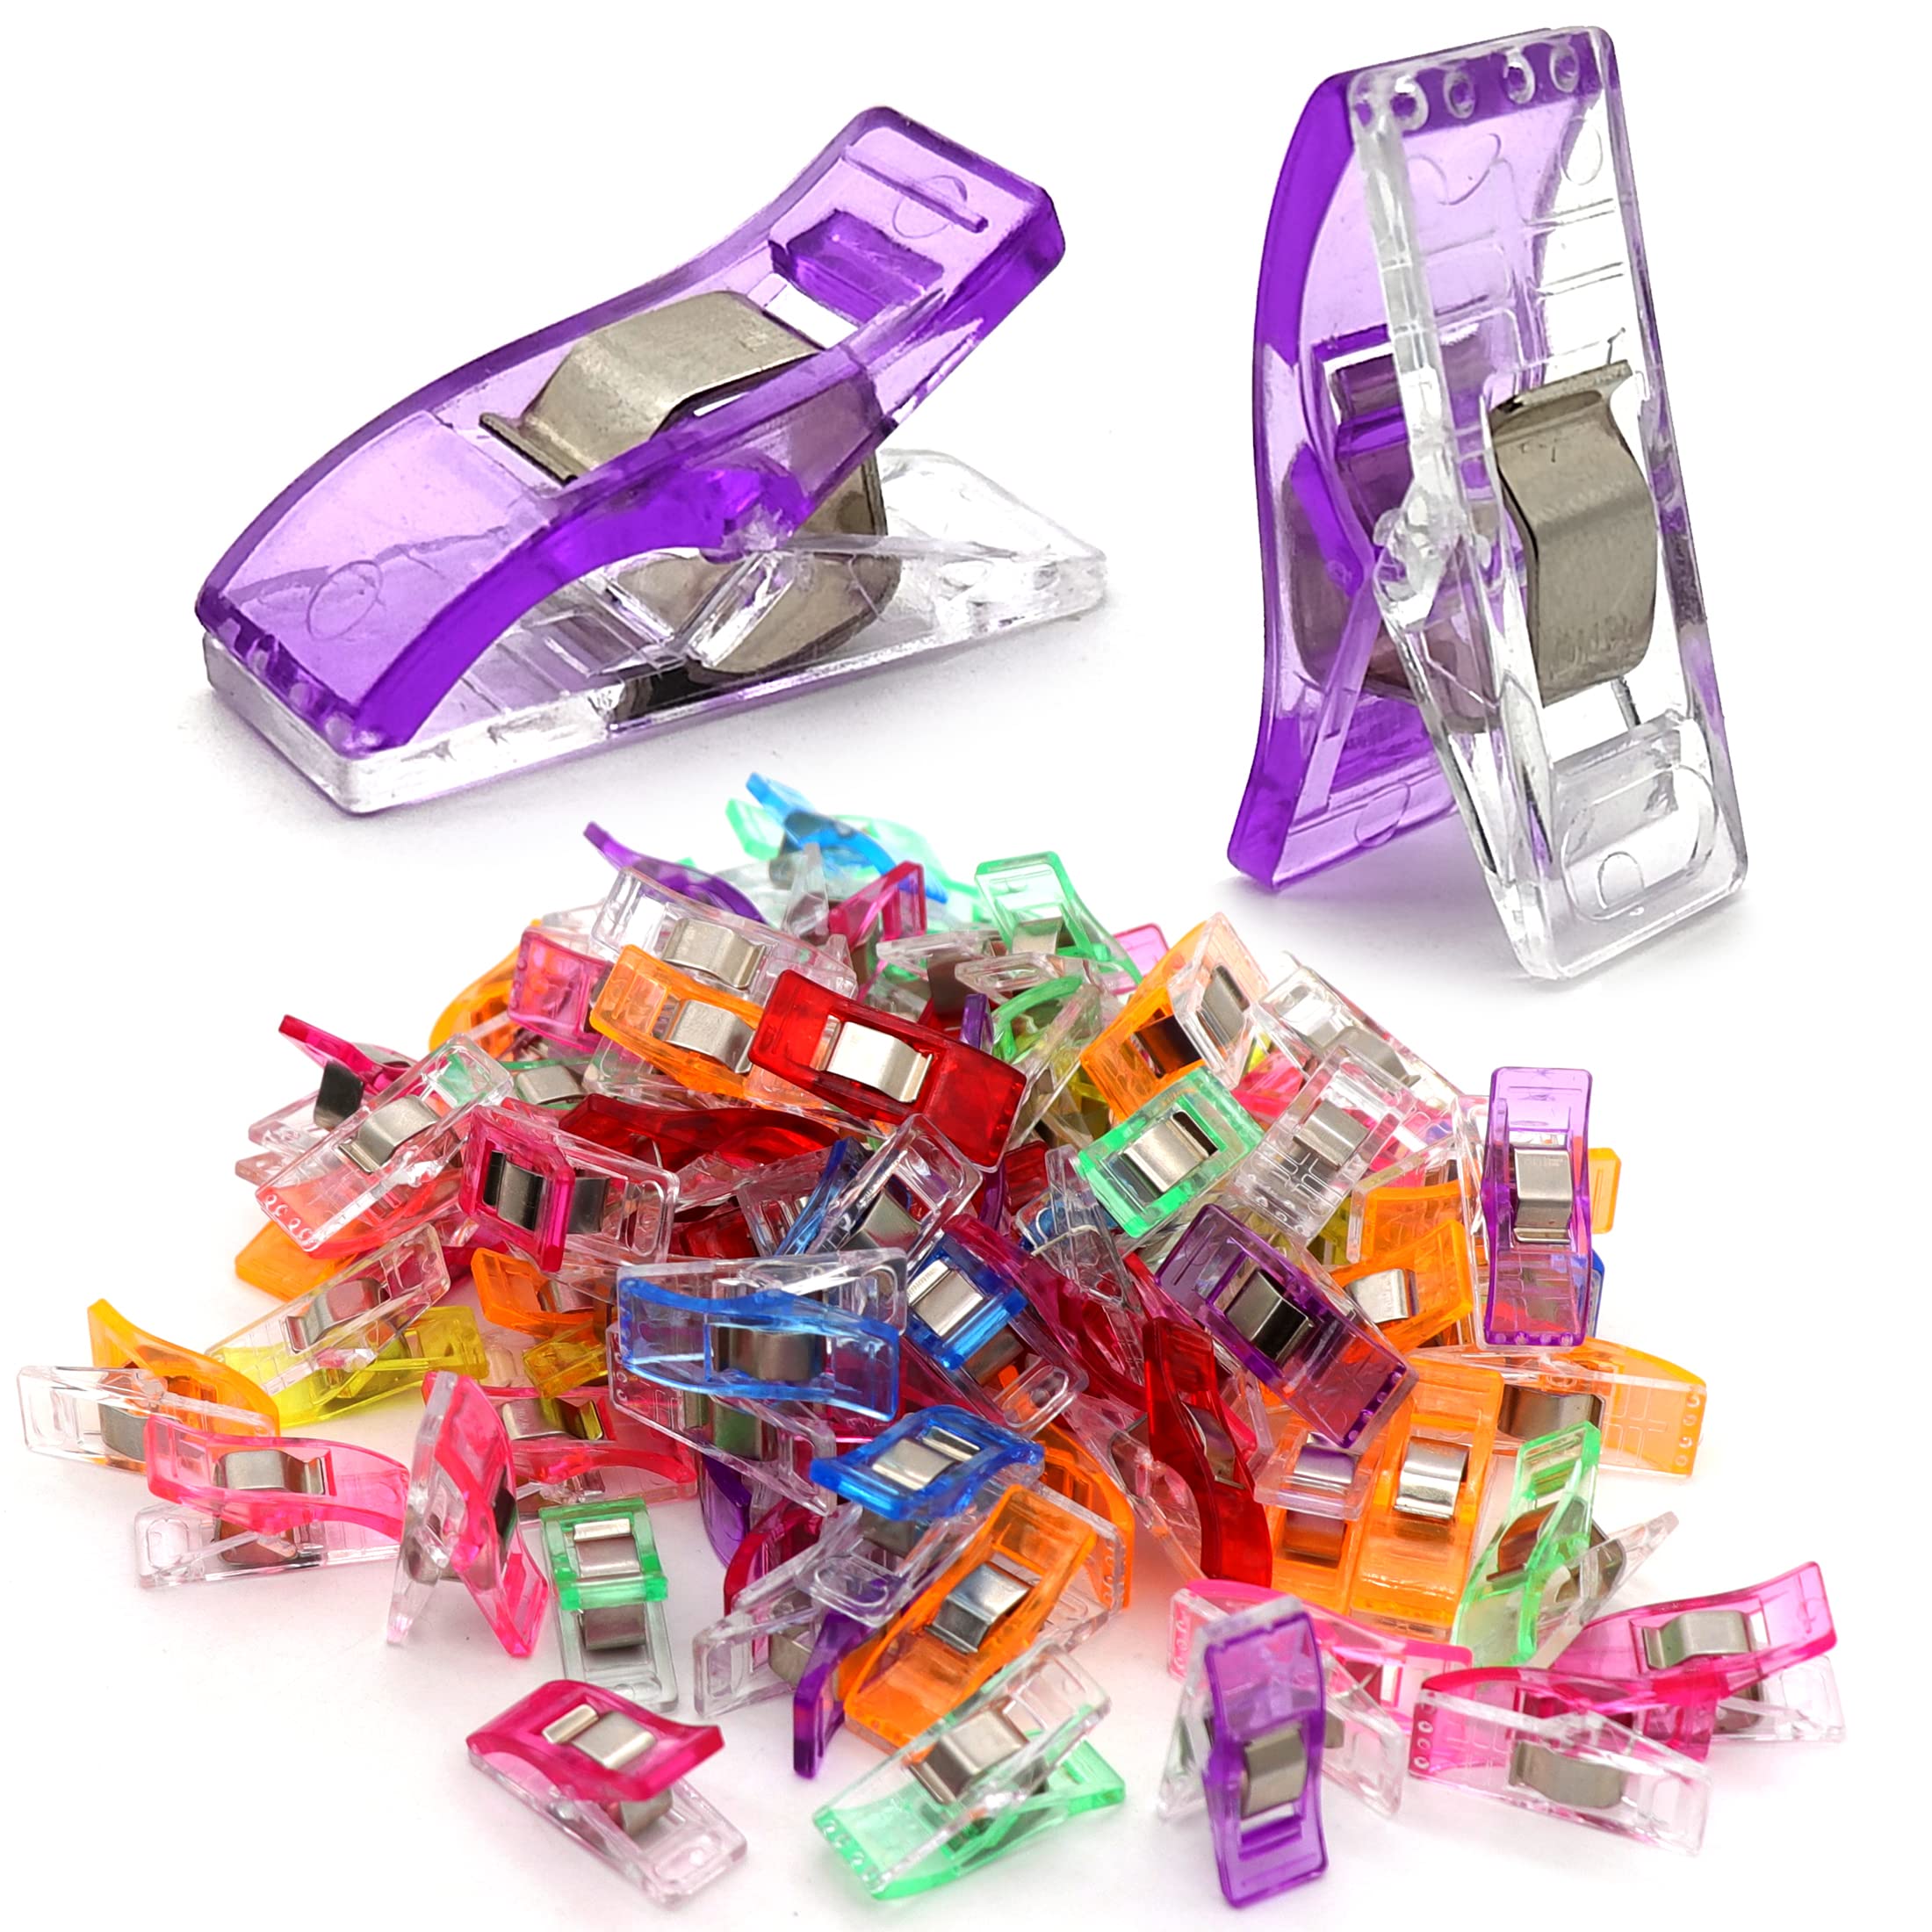  500 Pcs Multipurpose Quilting Clips Premium Sewing Clips for  Fabric and Quilting, Plastic Clips for Crafts, Quilt Clips Sewing Notions  Sewing Products for Sewing Supplies Crafting Tools